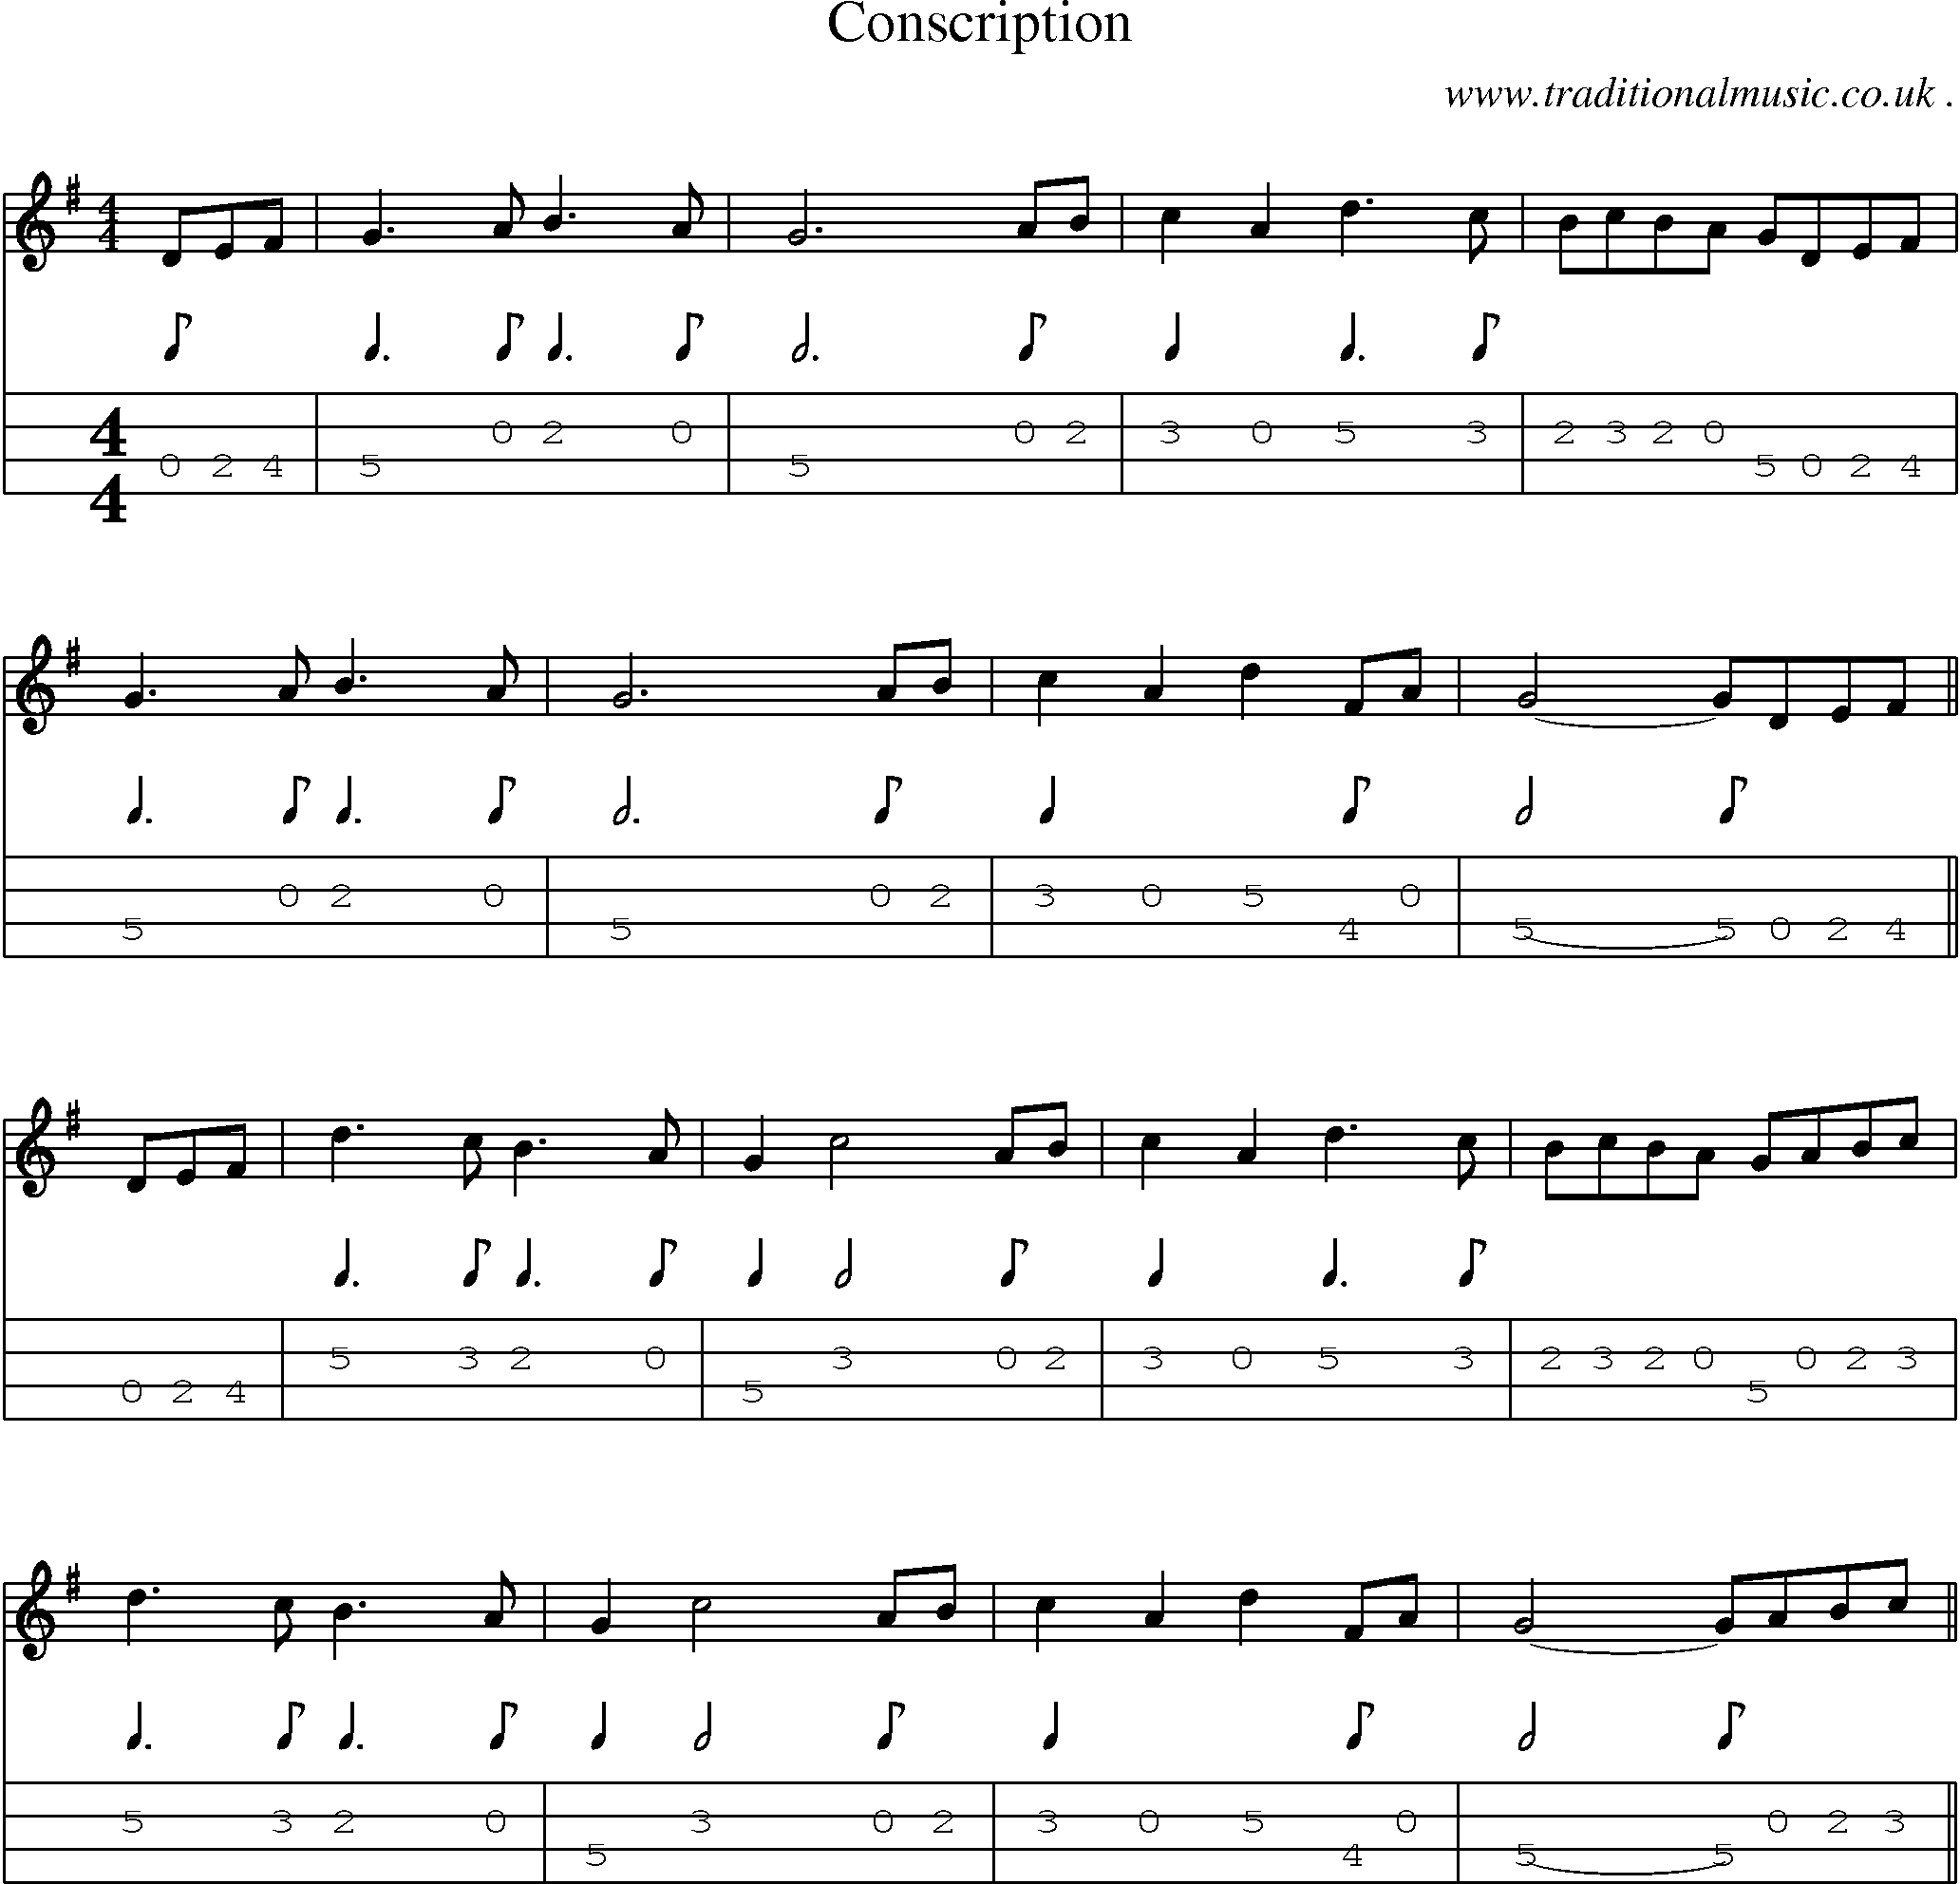 Sheet-Music and Mandolin Tabs for Conscription